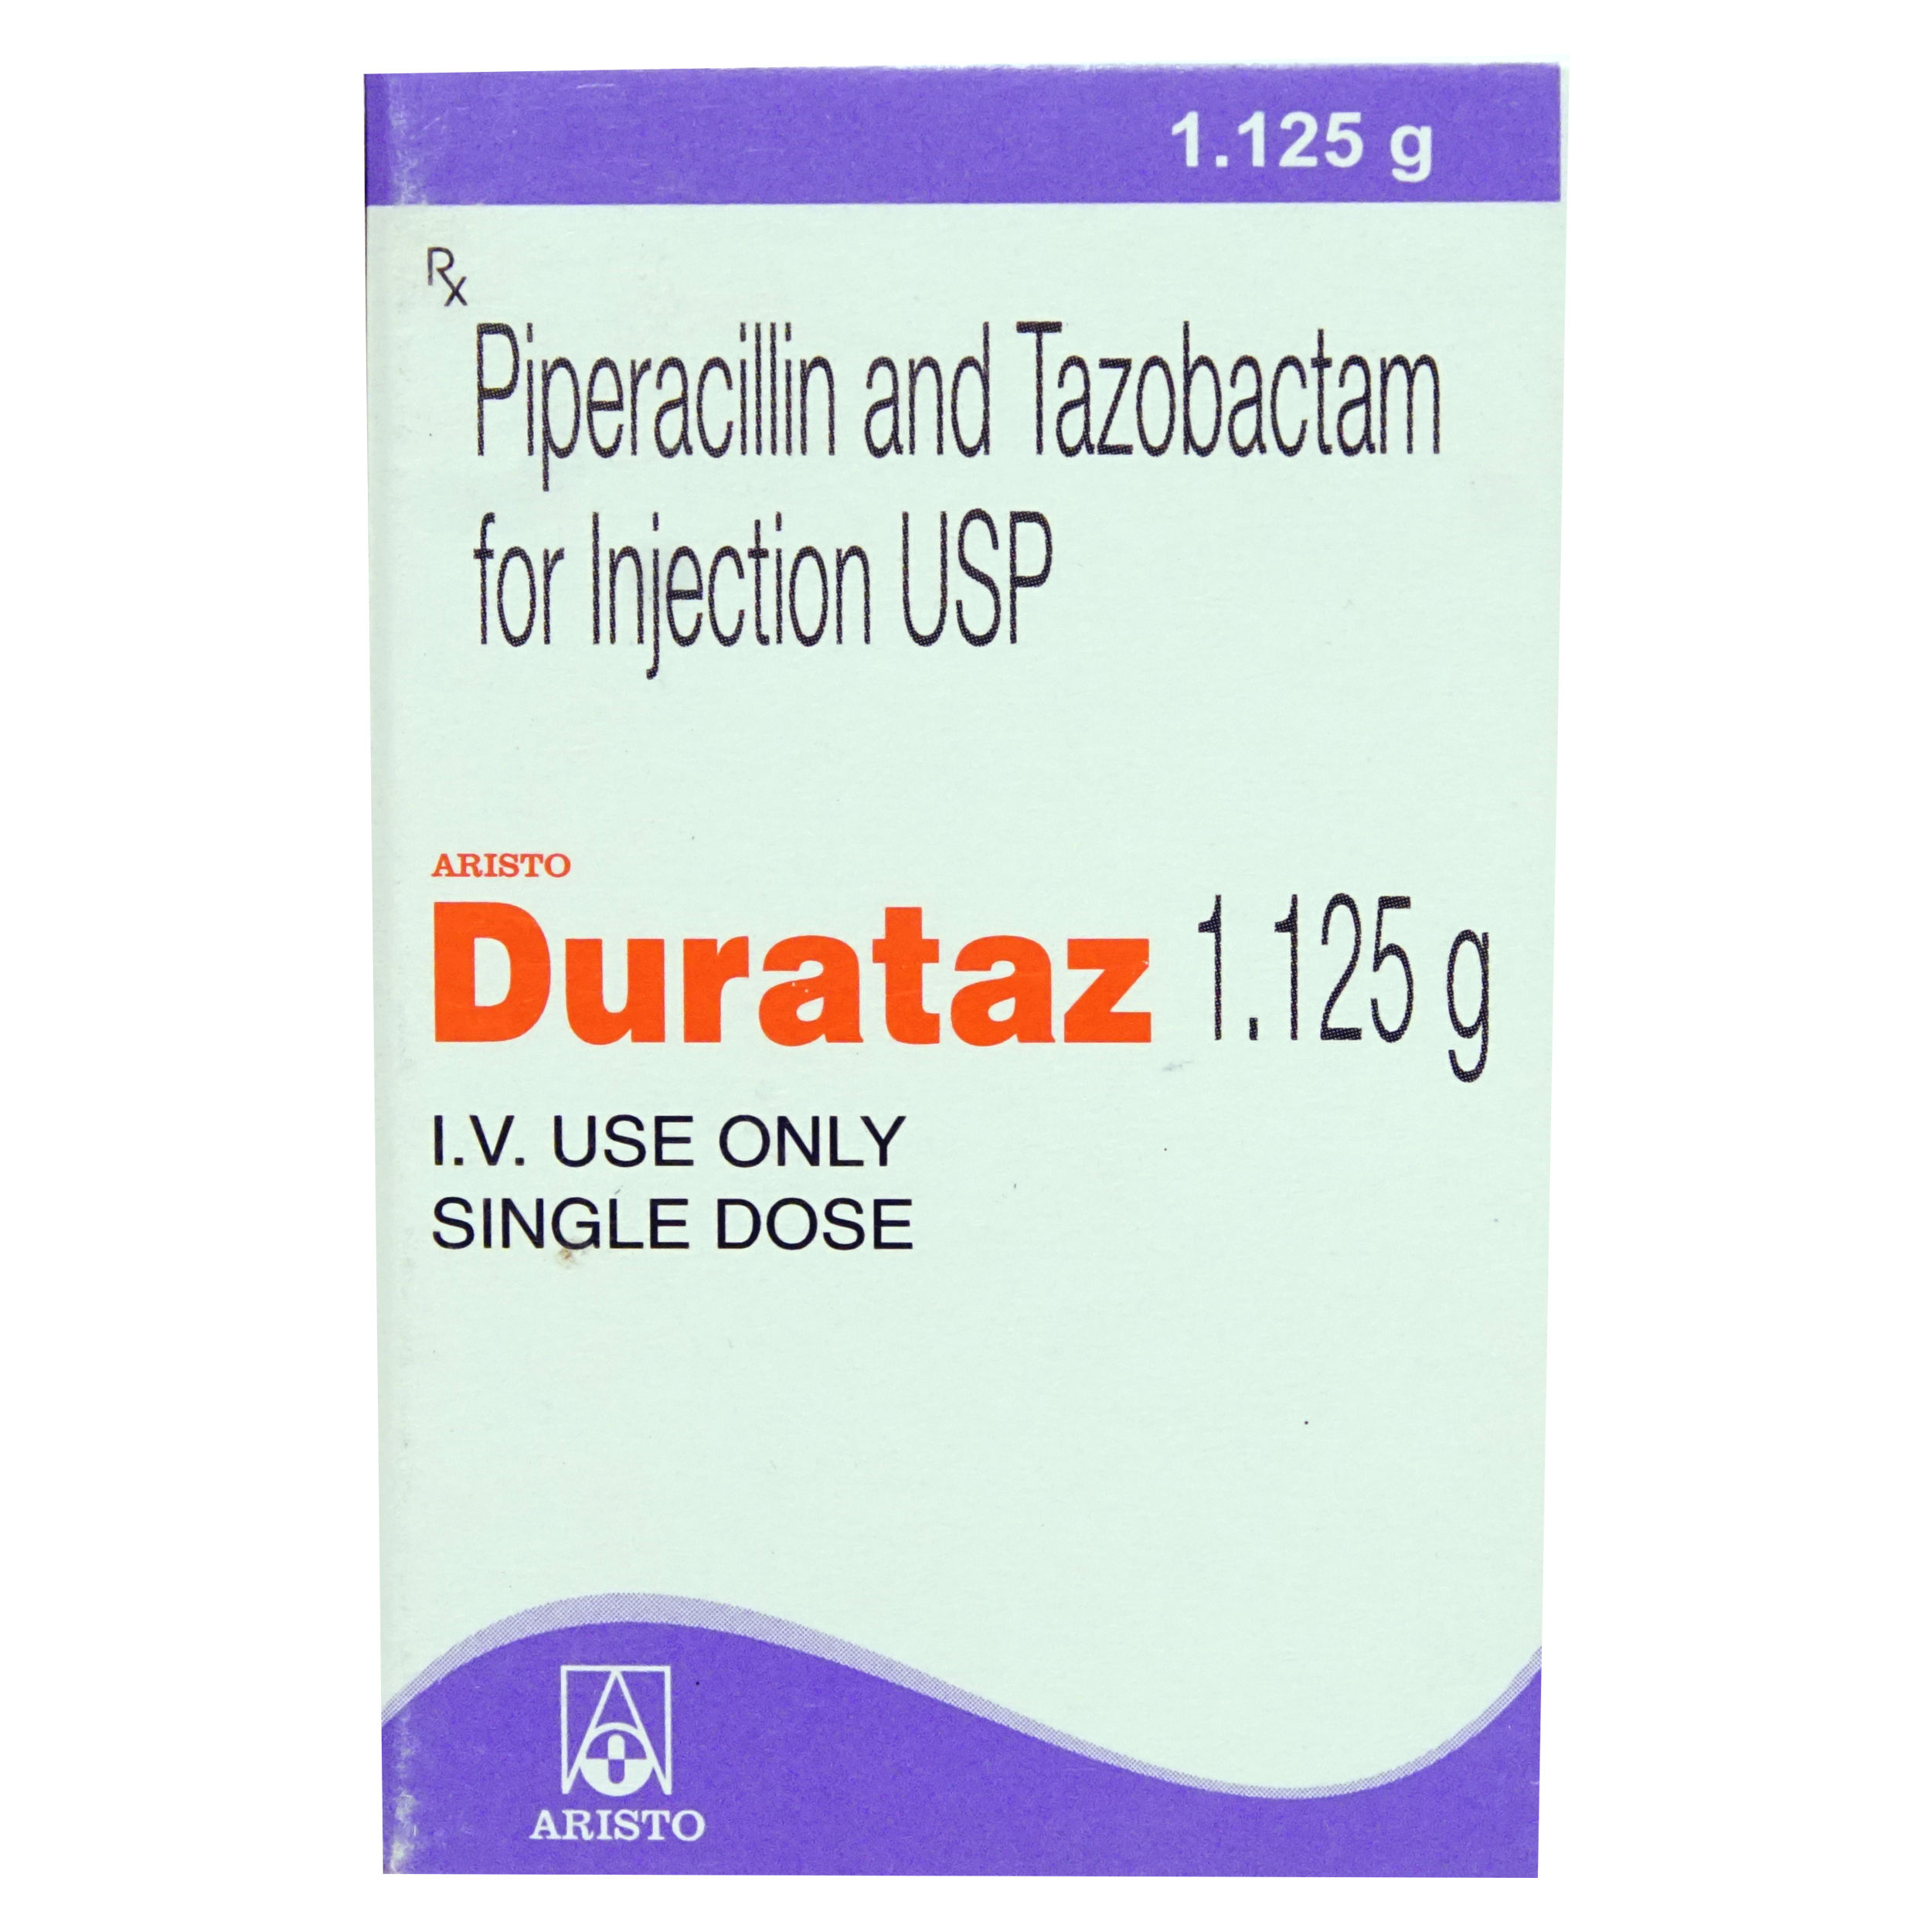 DURATAZ 1.125MG INJECTION Uses, Side Effects, Price Apollo Pharmacy